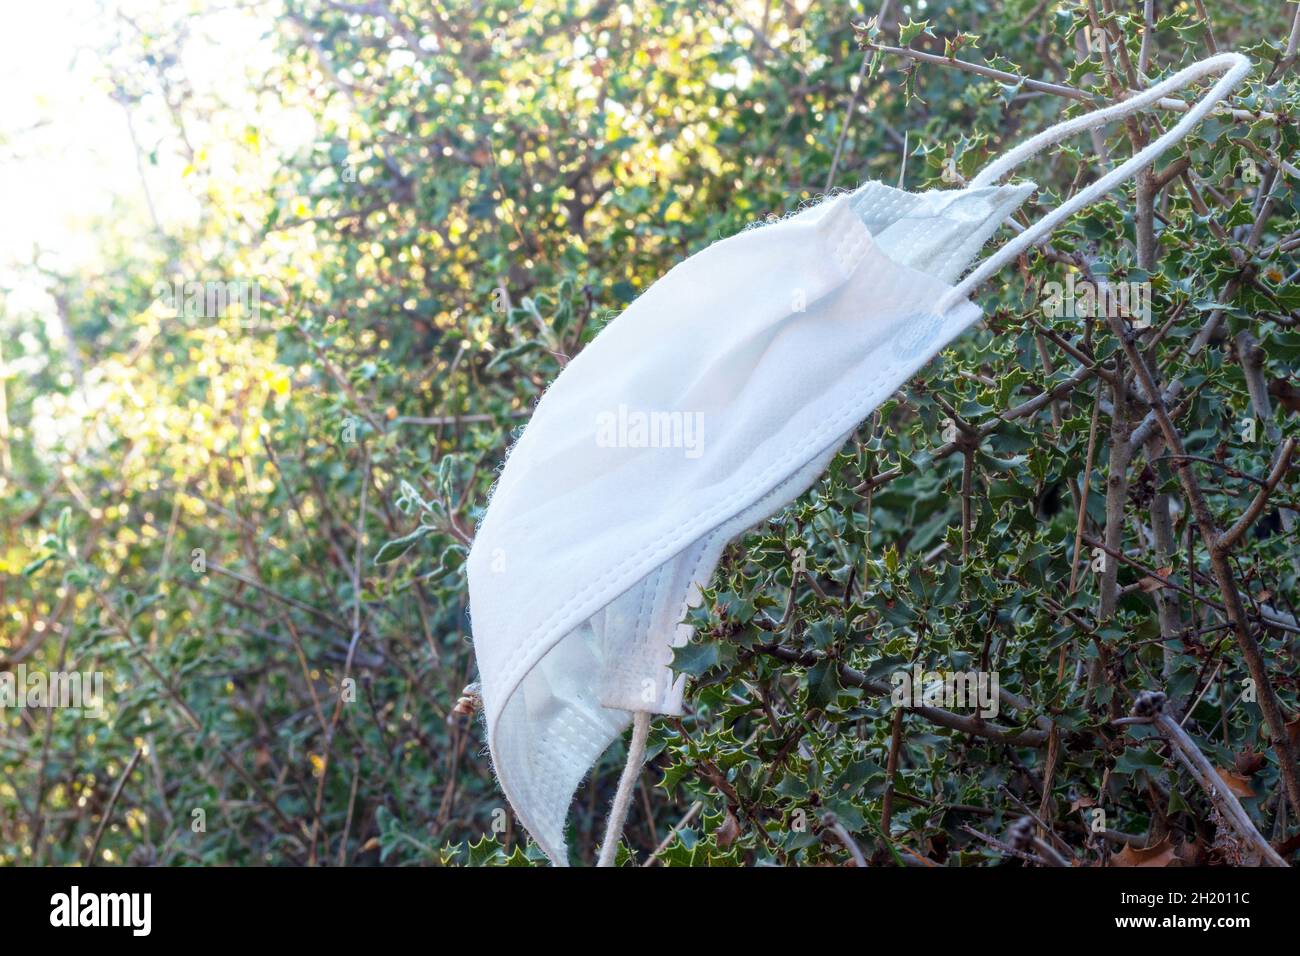 Dirty face mask stuck in the bushes. Concept of effect of coronavirus on environmental pollution. Stock Photo